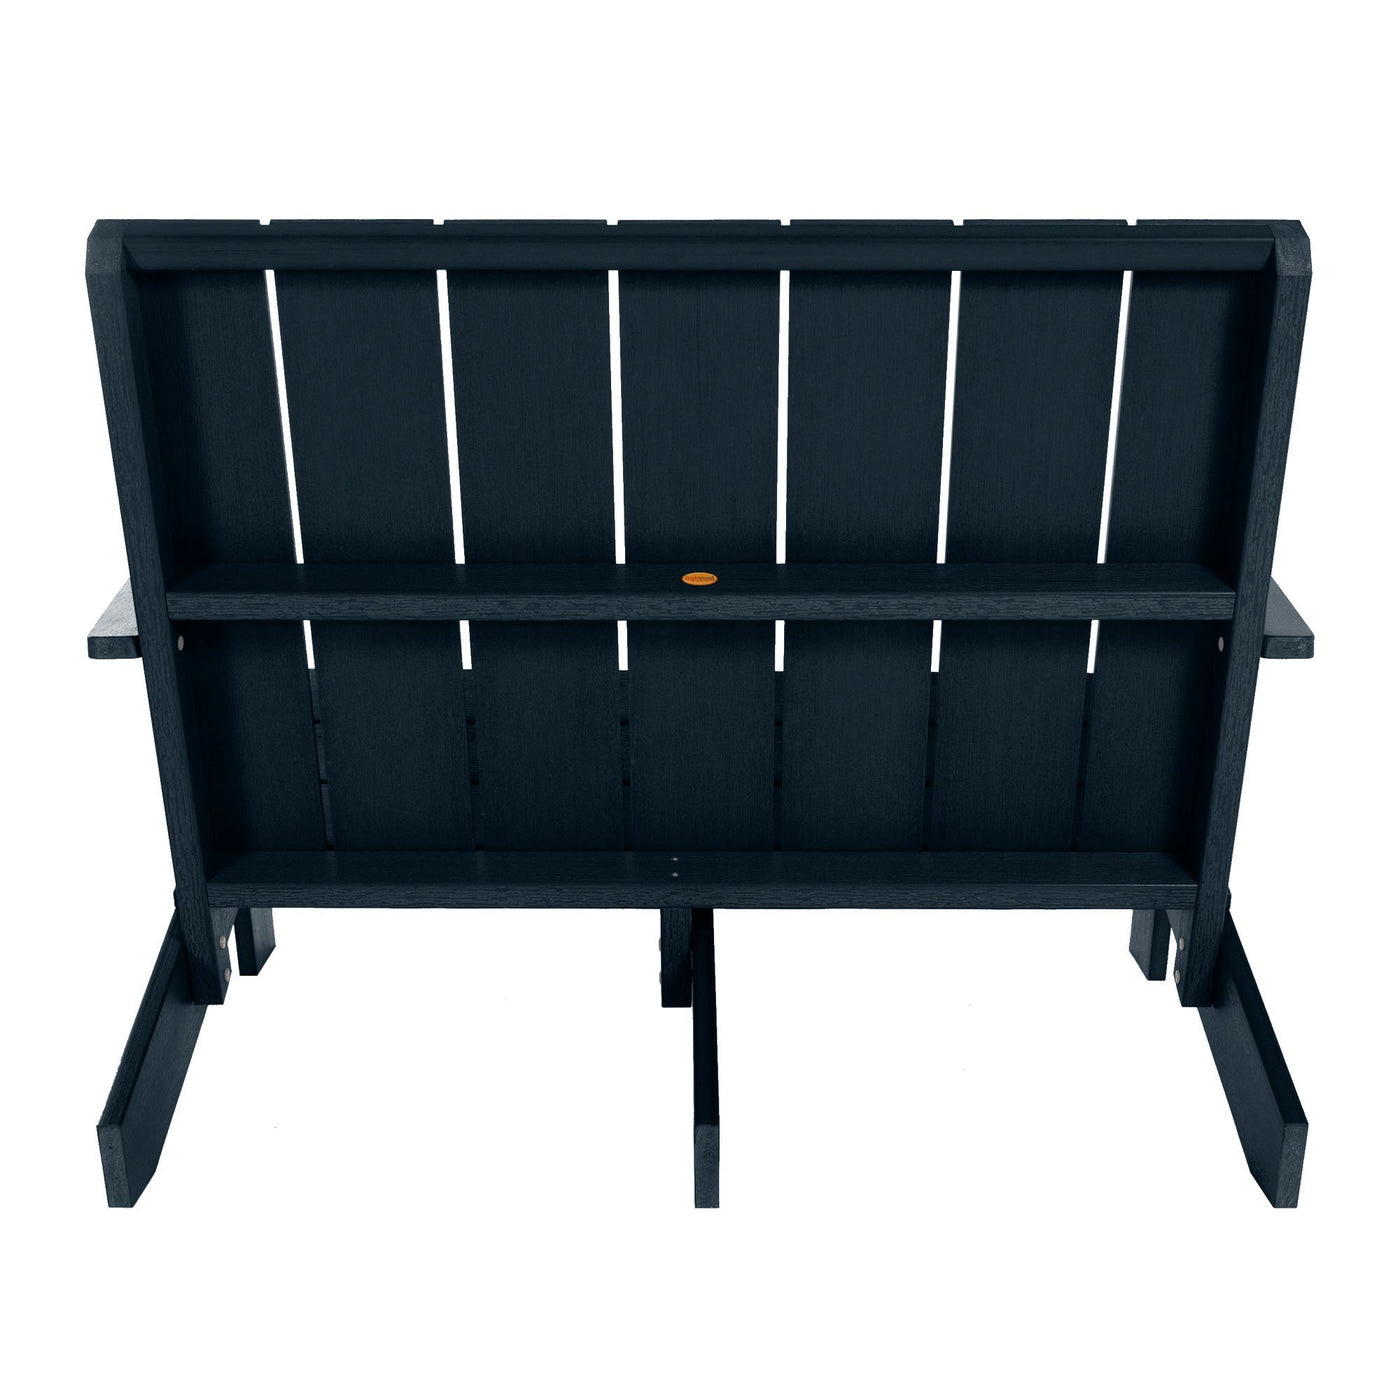 Back view of Italica Modern bench in Federal Blue